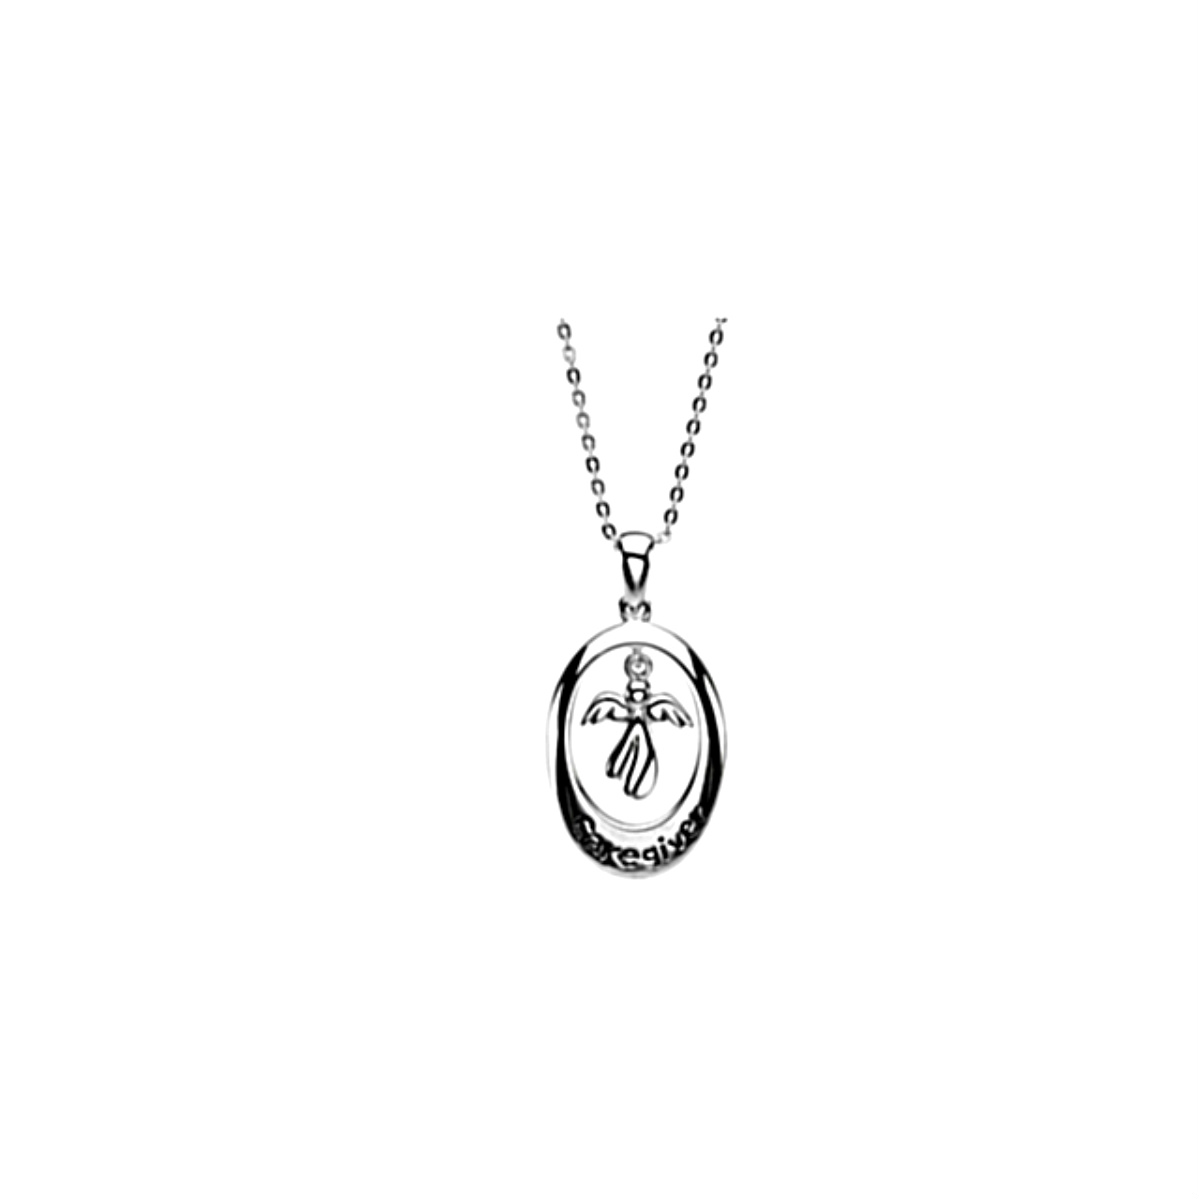 Oval Caregiver Angel Pendant Rhodium Plate Sterling Silver Necklace. 